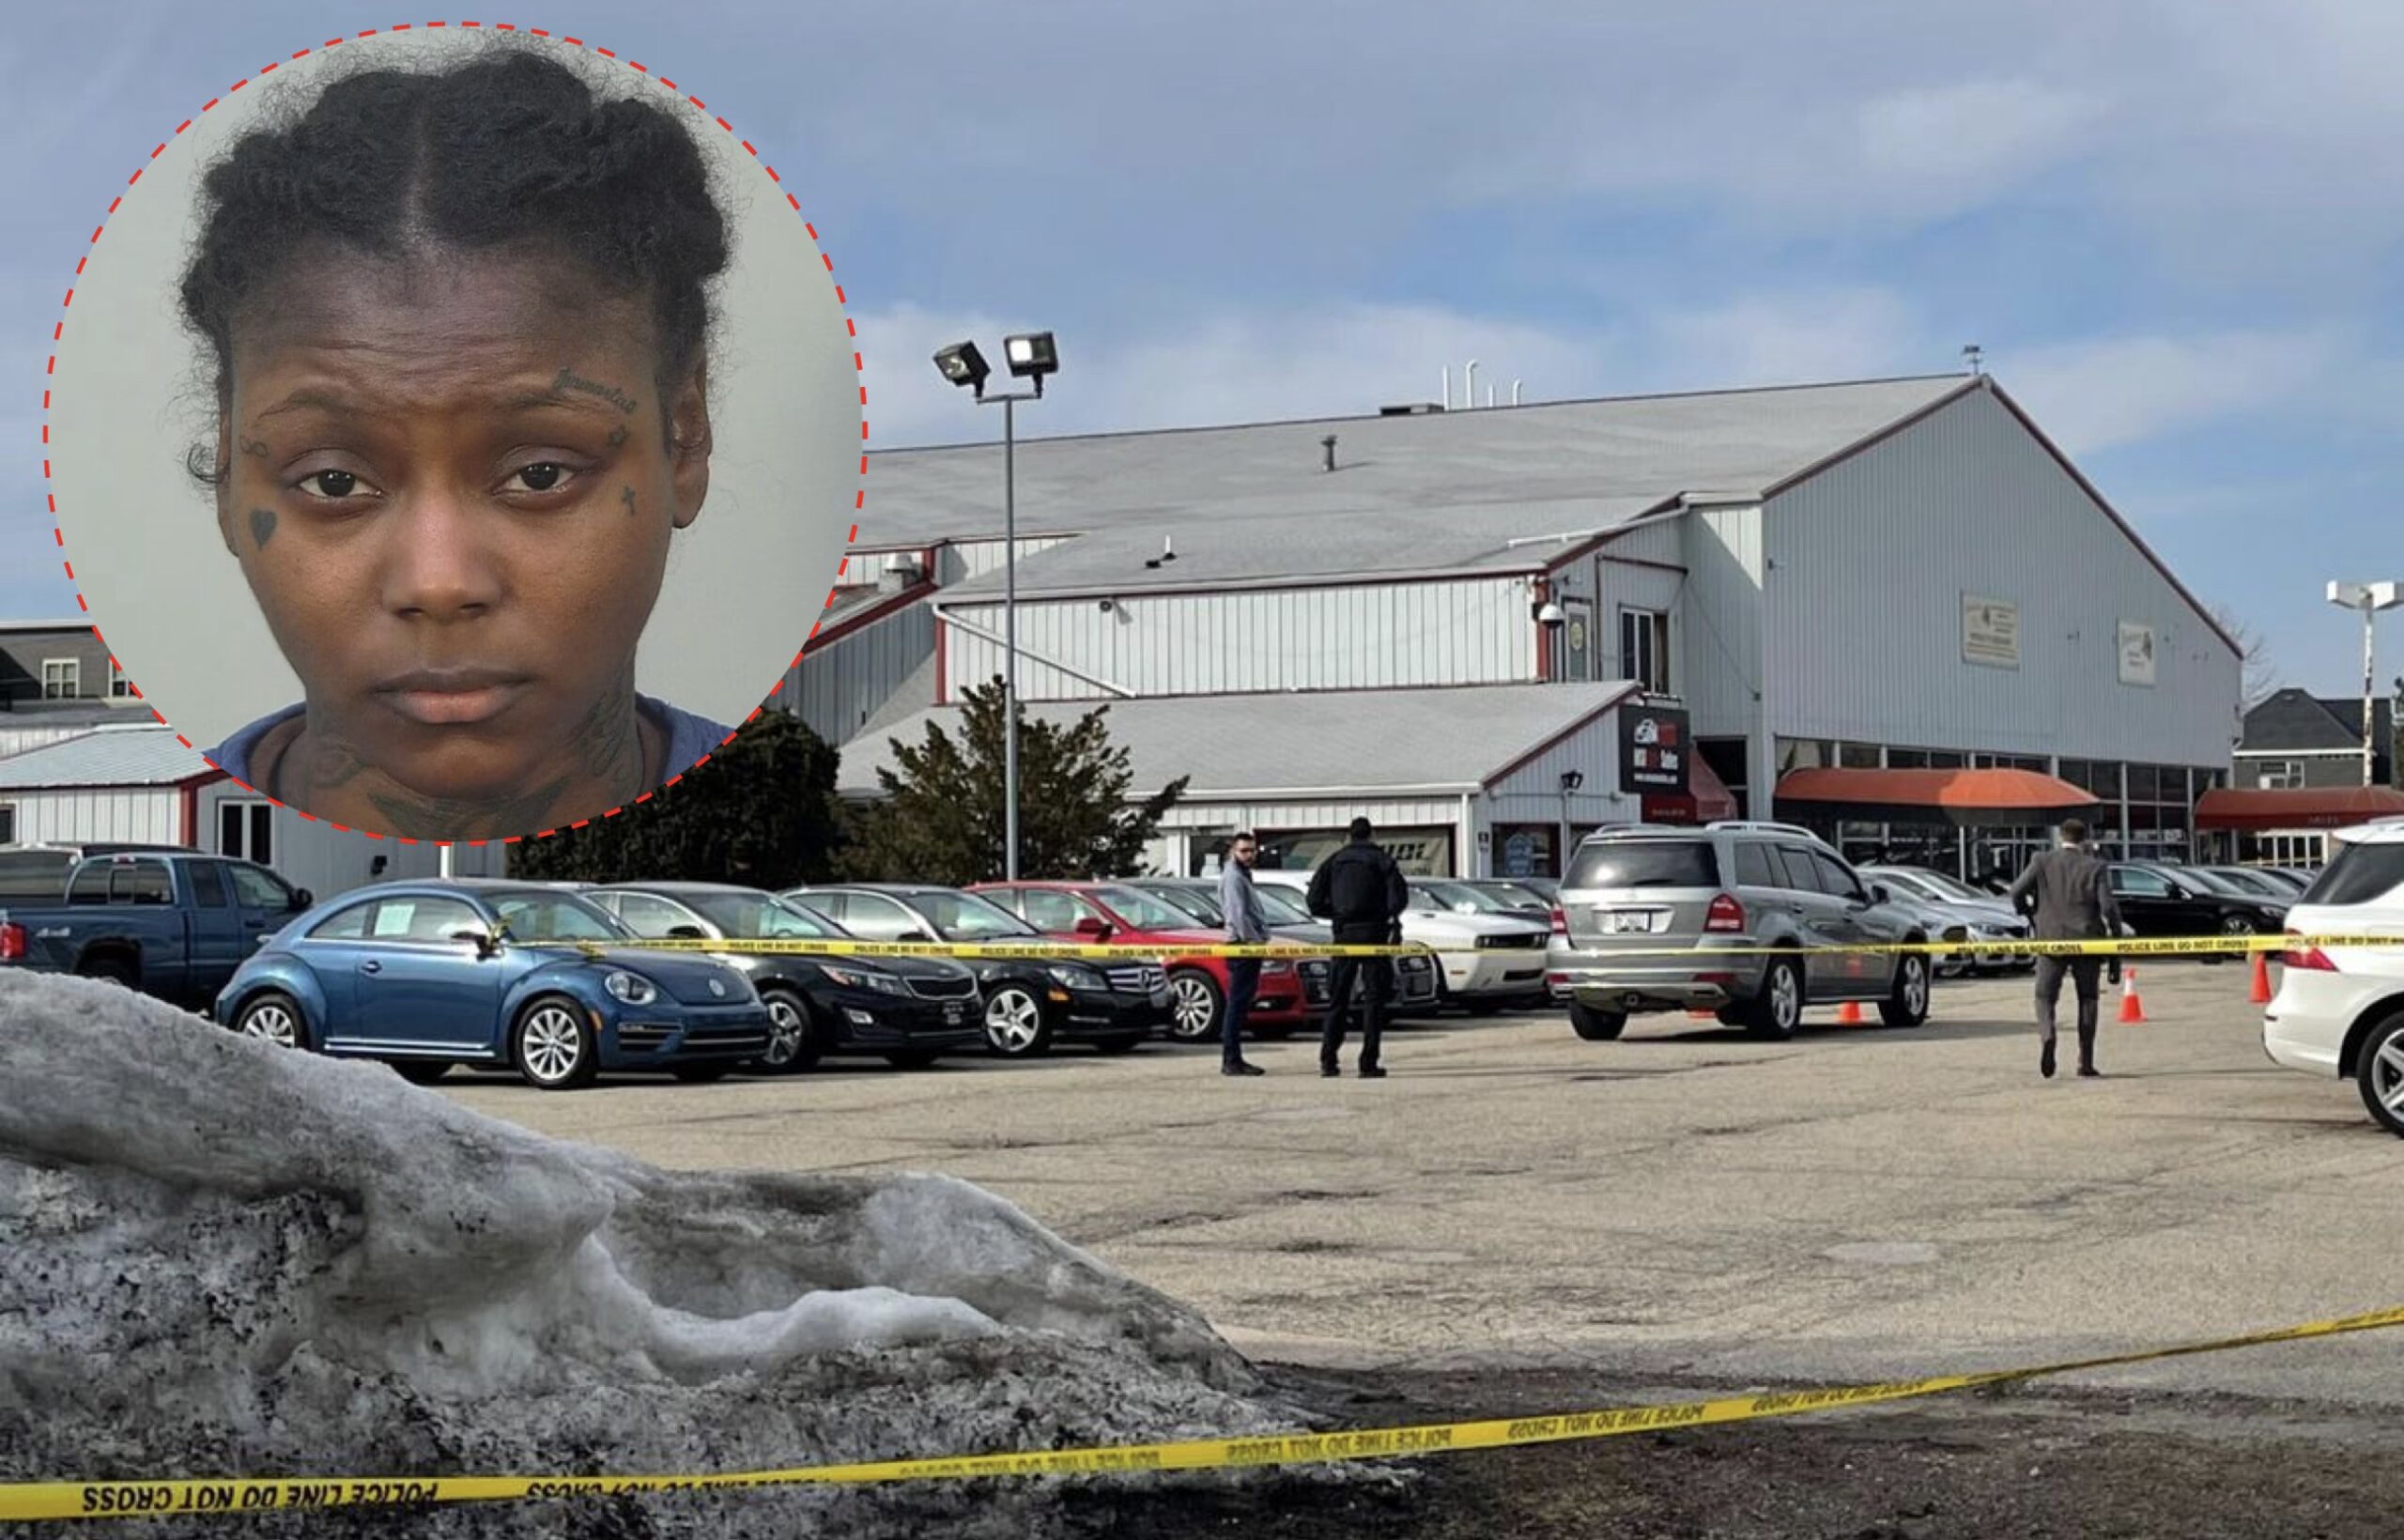 Wisconsin Woman Fatally Shoots Car Salesman While Arguing Over Faulty Vehicle